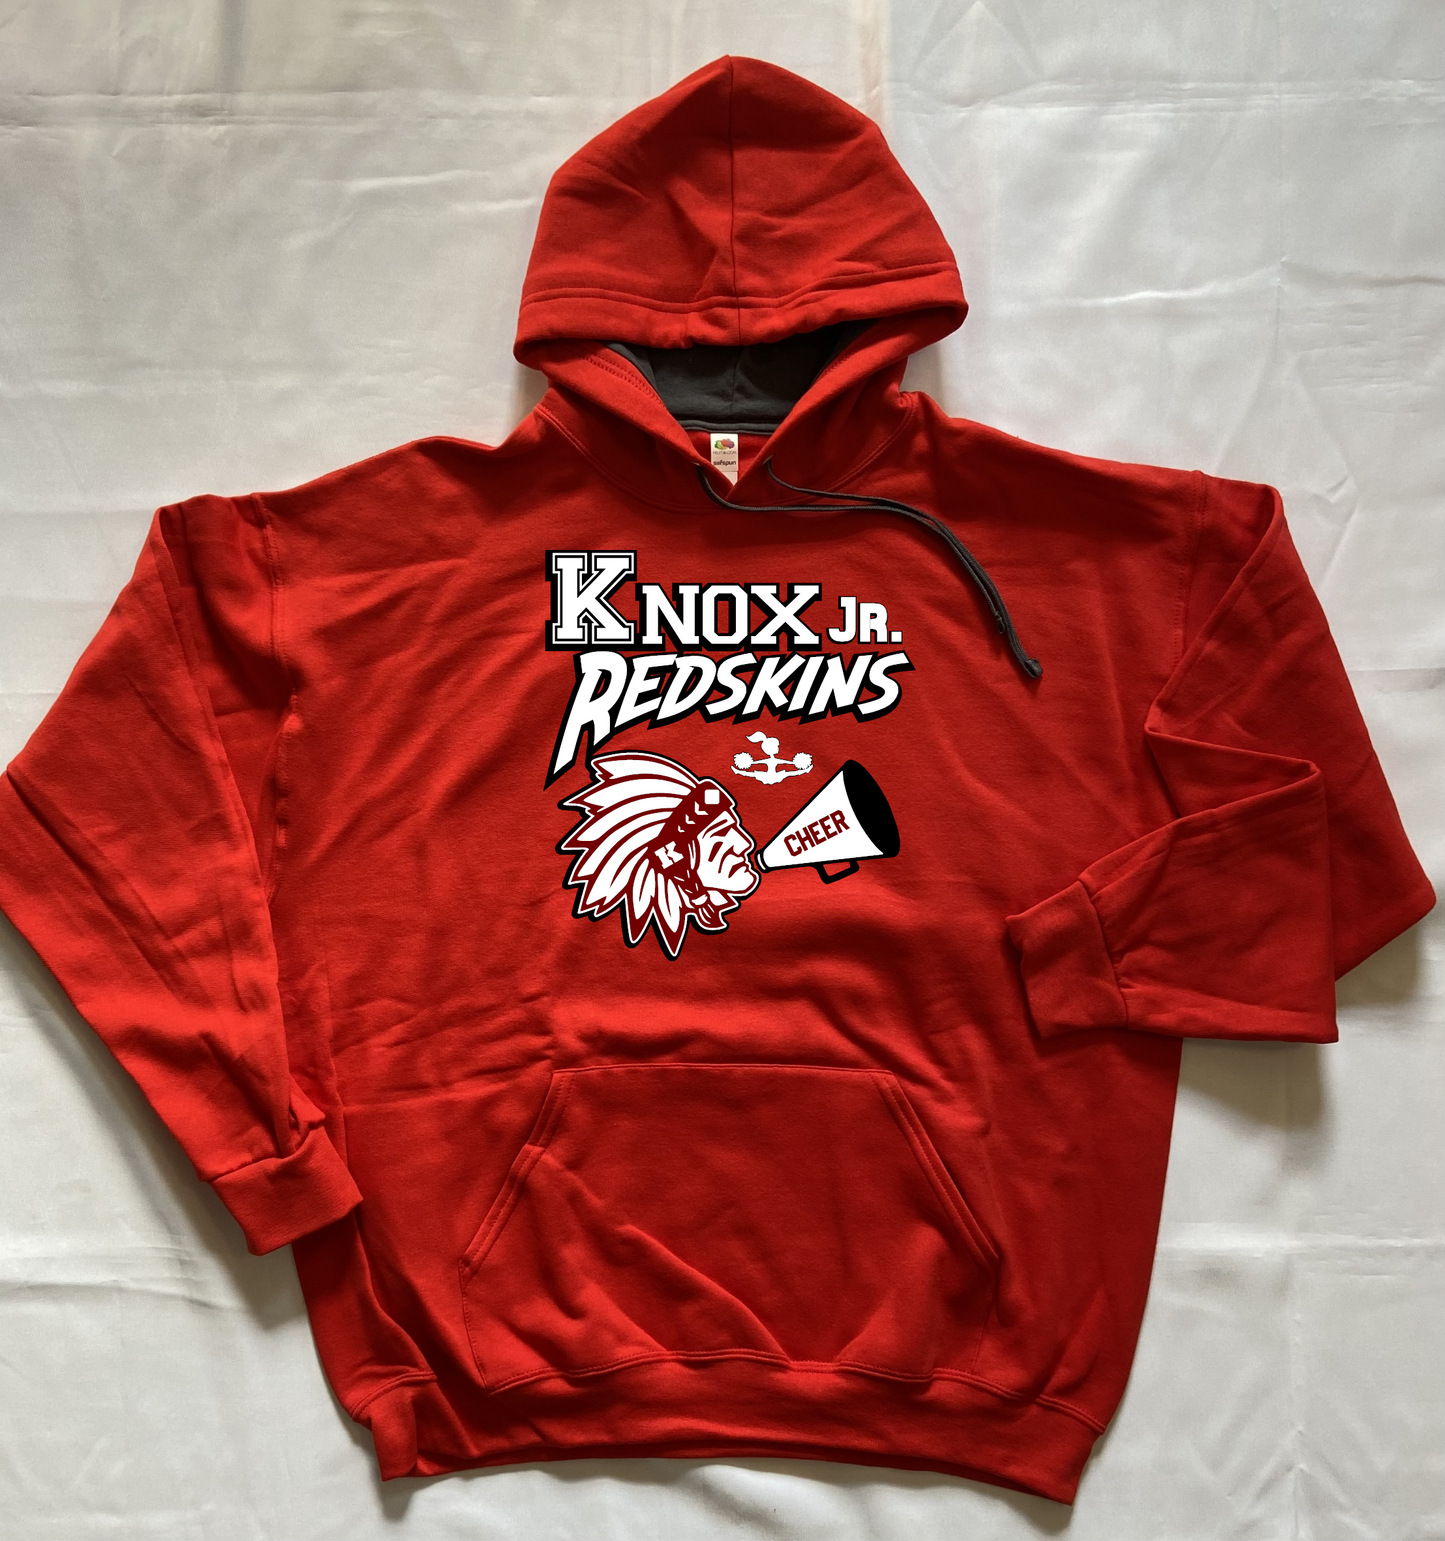 Cheer Knox Jr Redskins Hoodie - Red - Adult and Youth Sizes